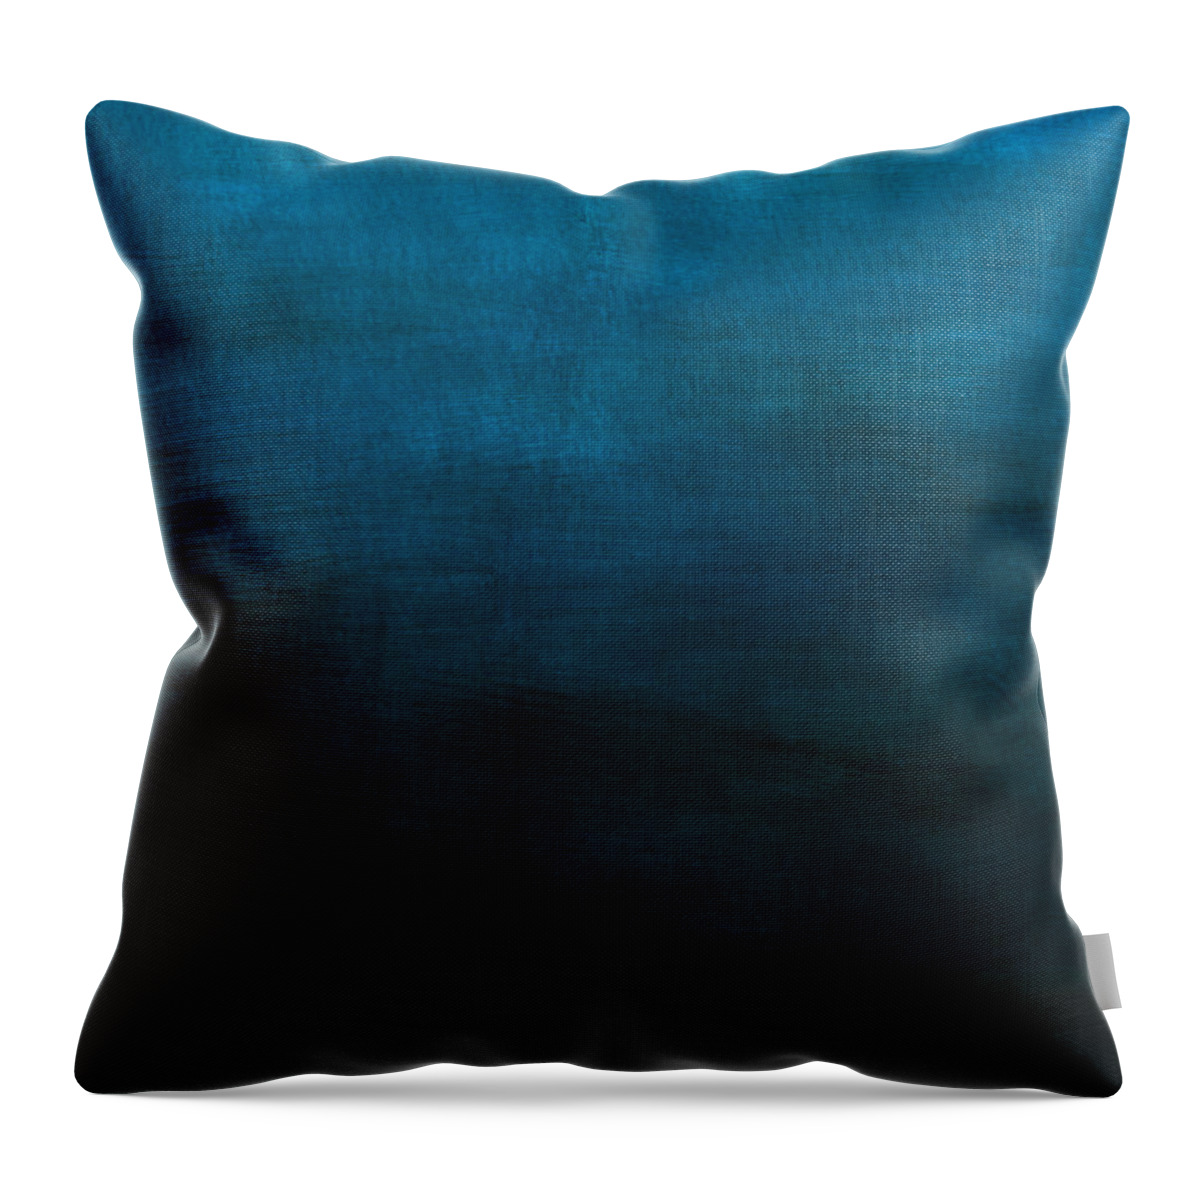 Blue Throw Pillow featuring the mixed media Deep Blue Mood- Abstract Art by Linda Woods by Linda Woods